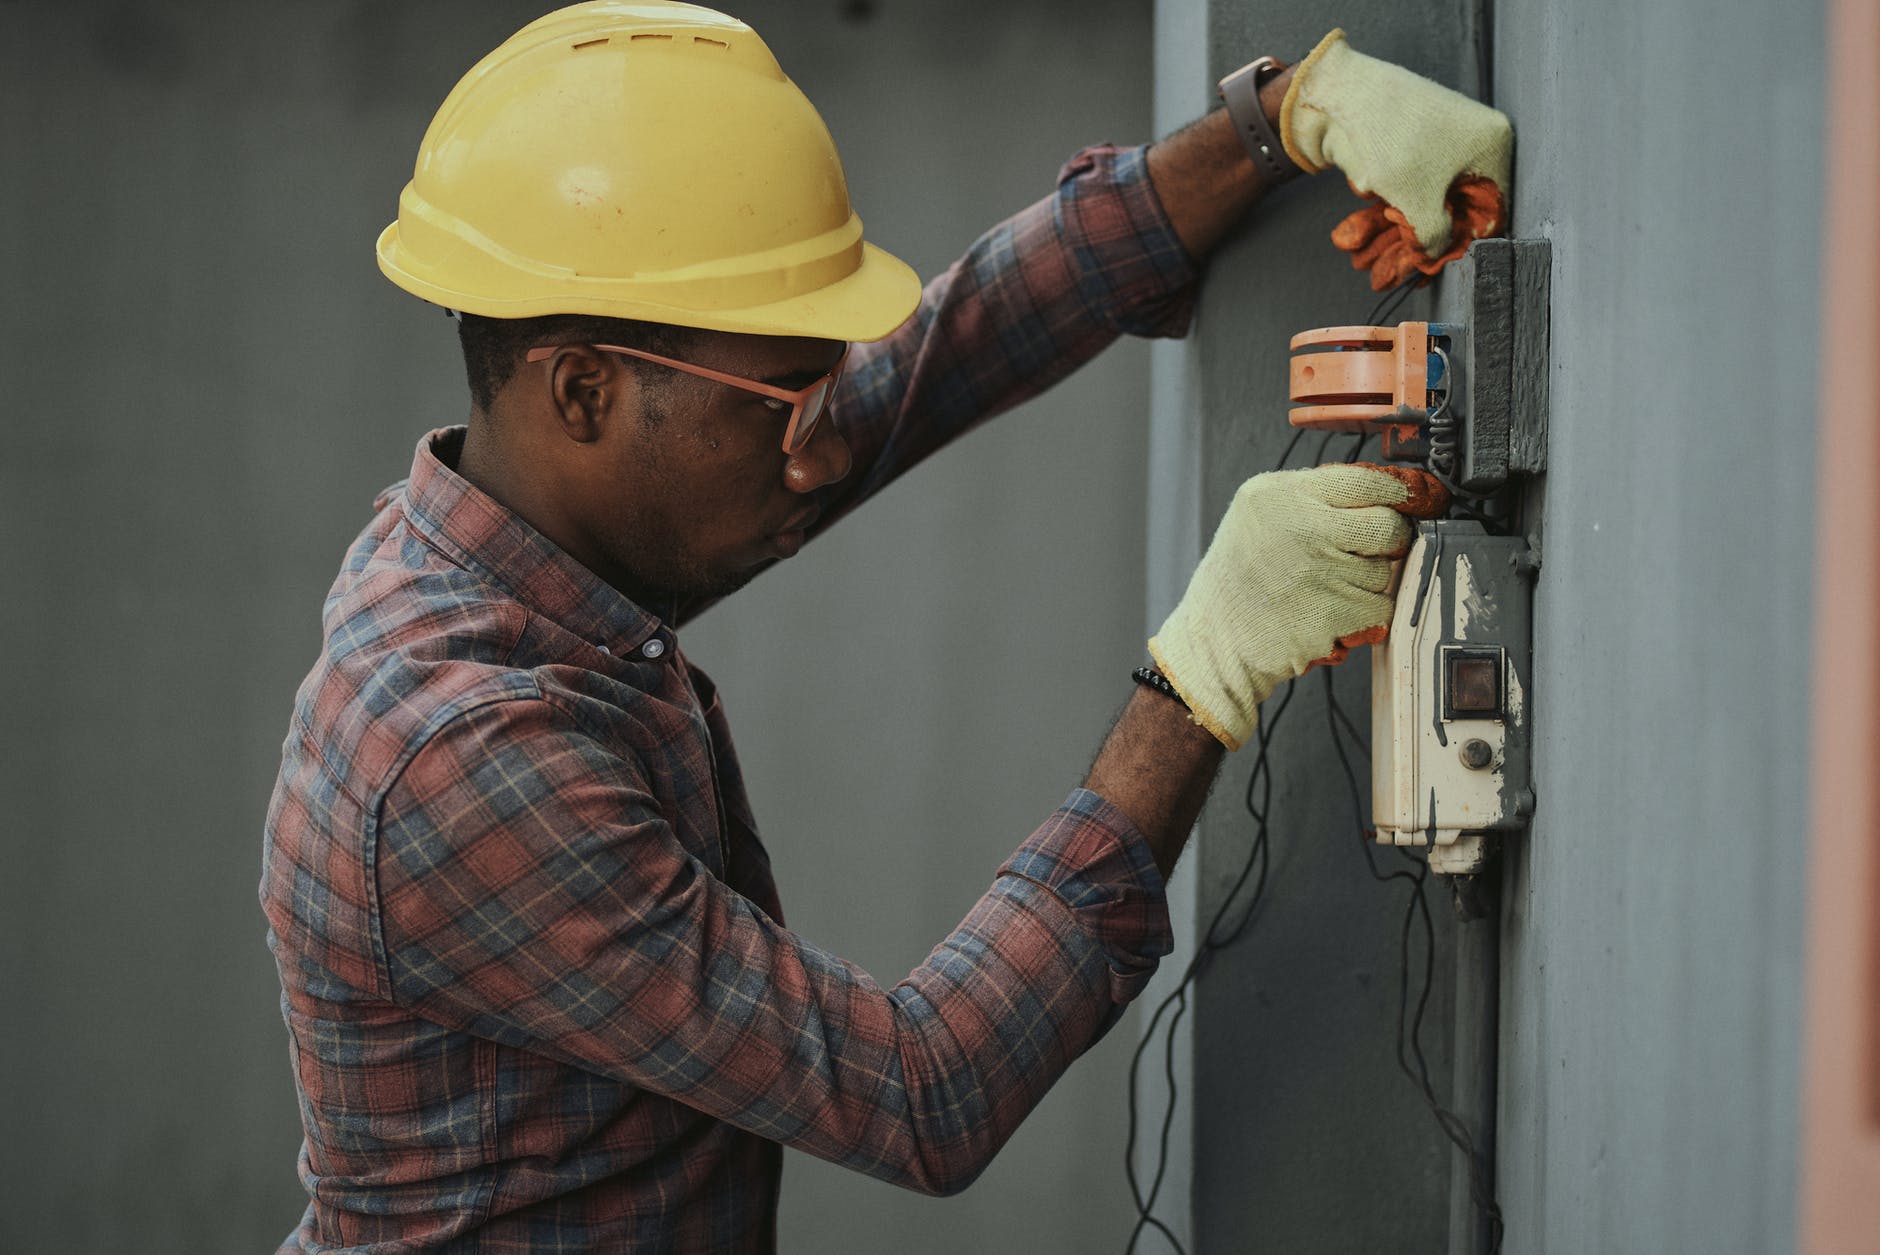 A professional electrician wearing a hard hat is working on an electrical outlet.